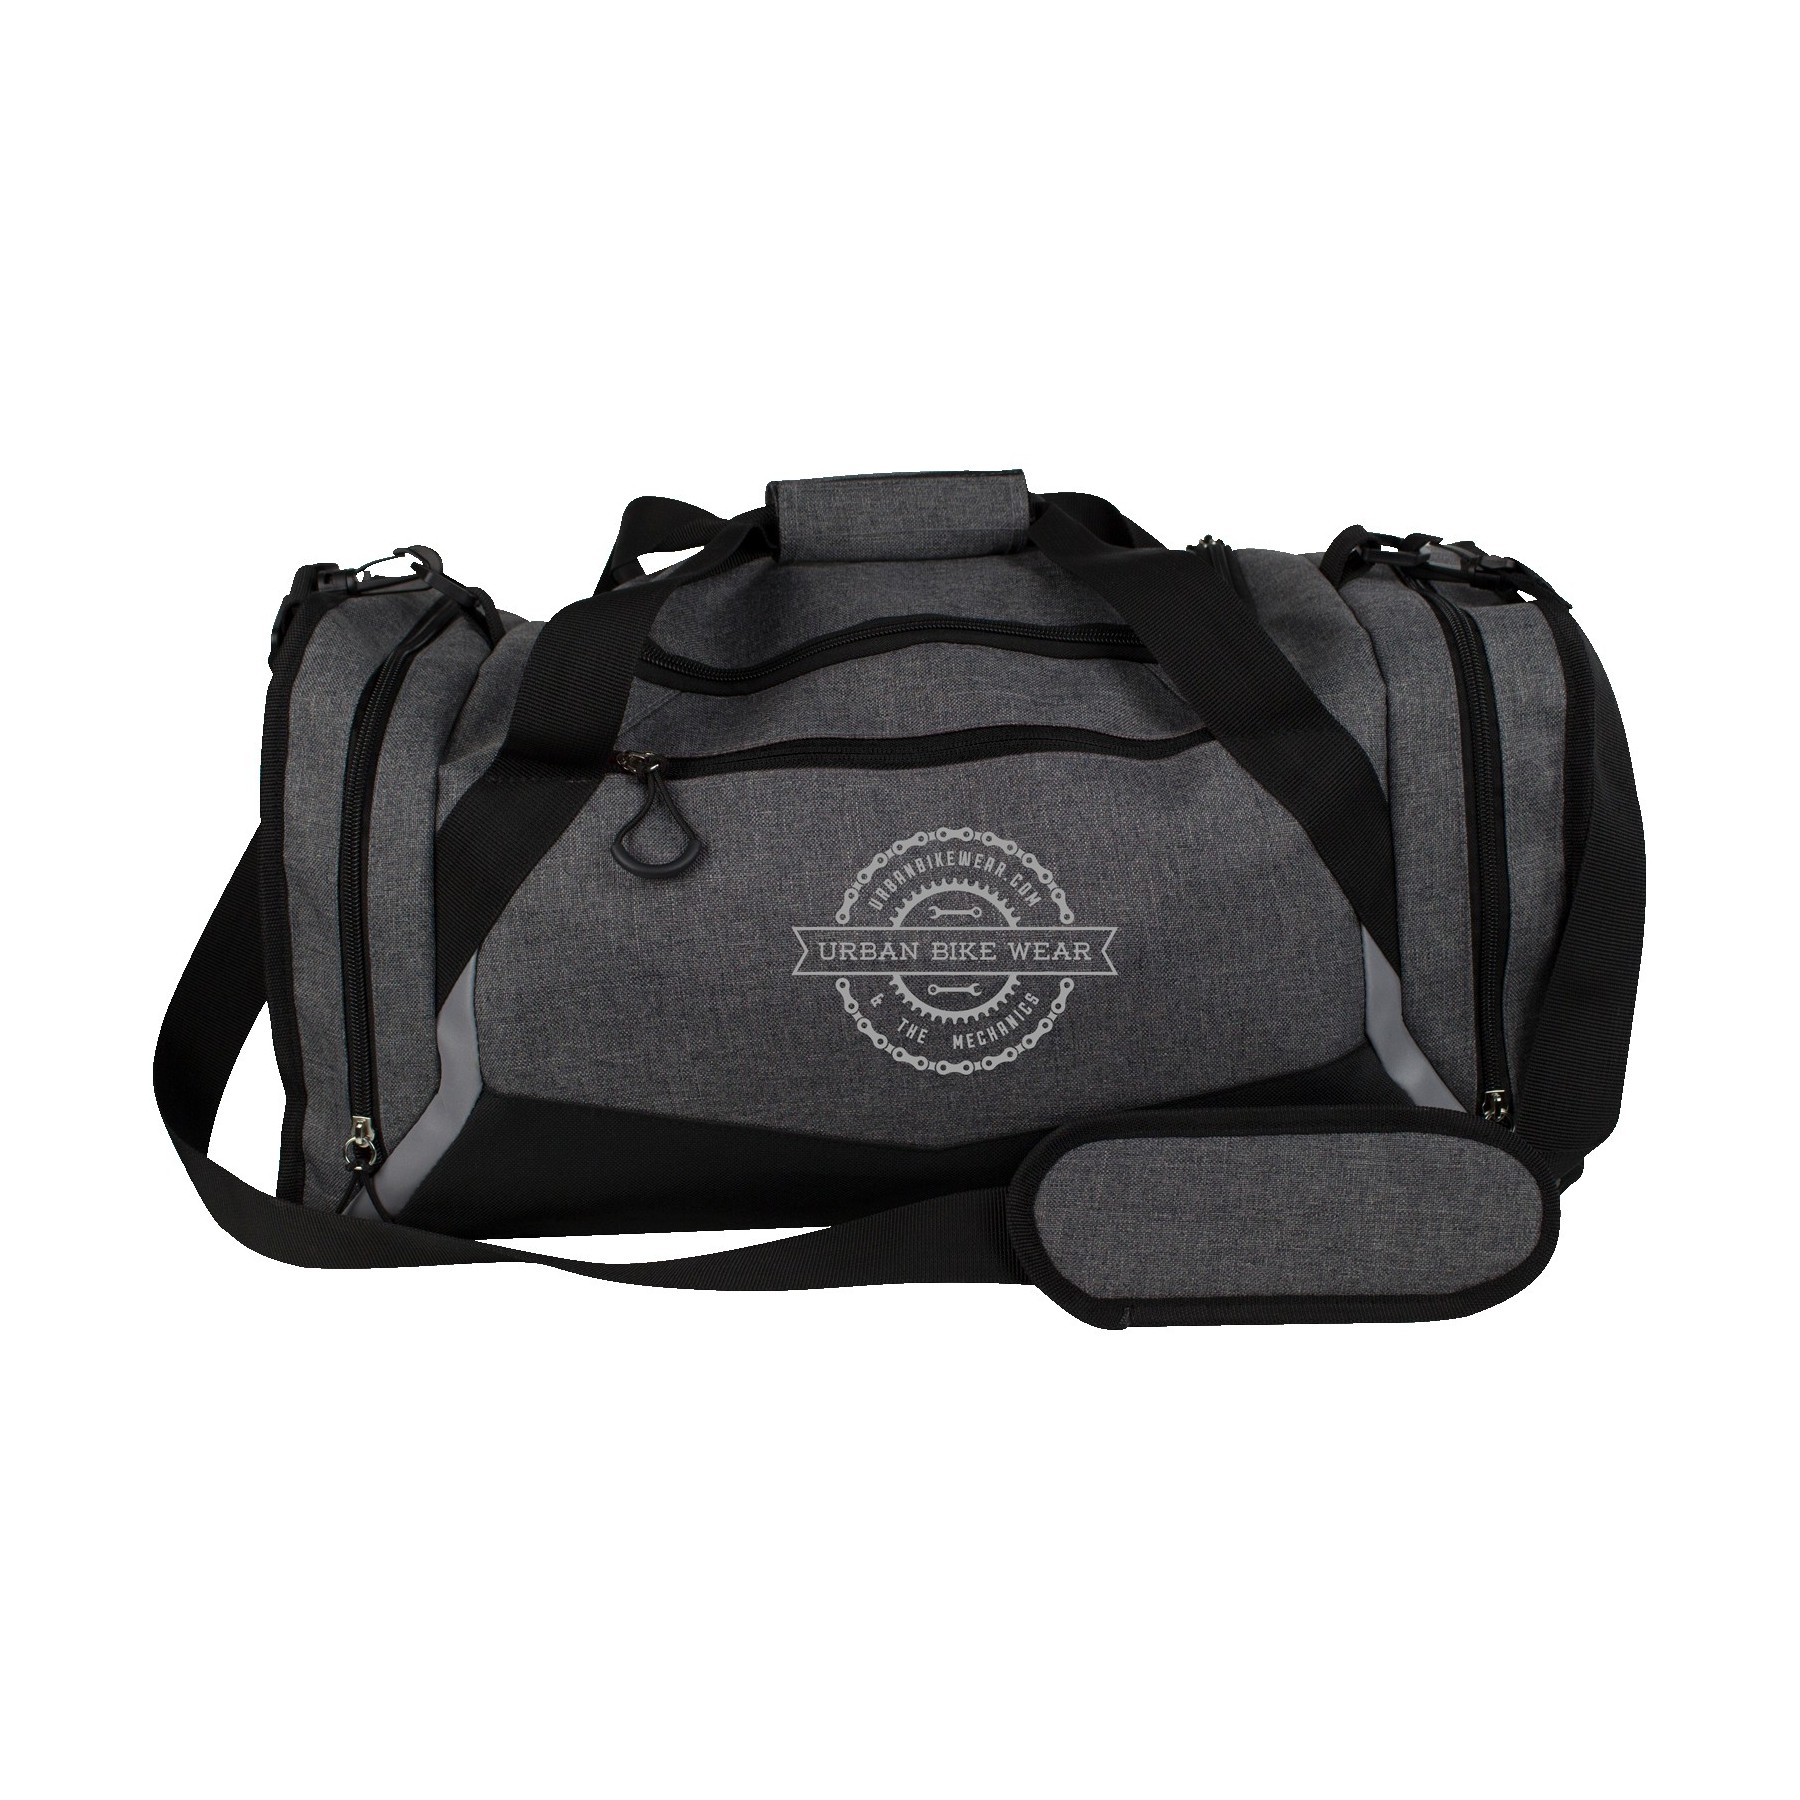 Branded duffle bag for employee appreciation